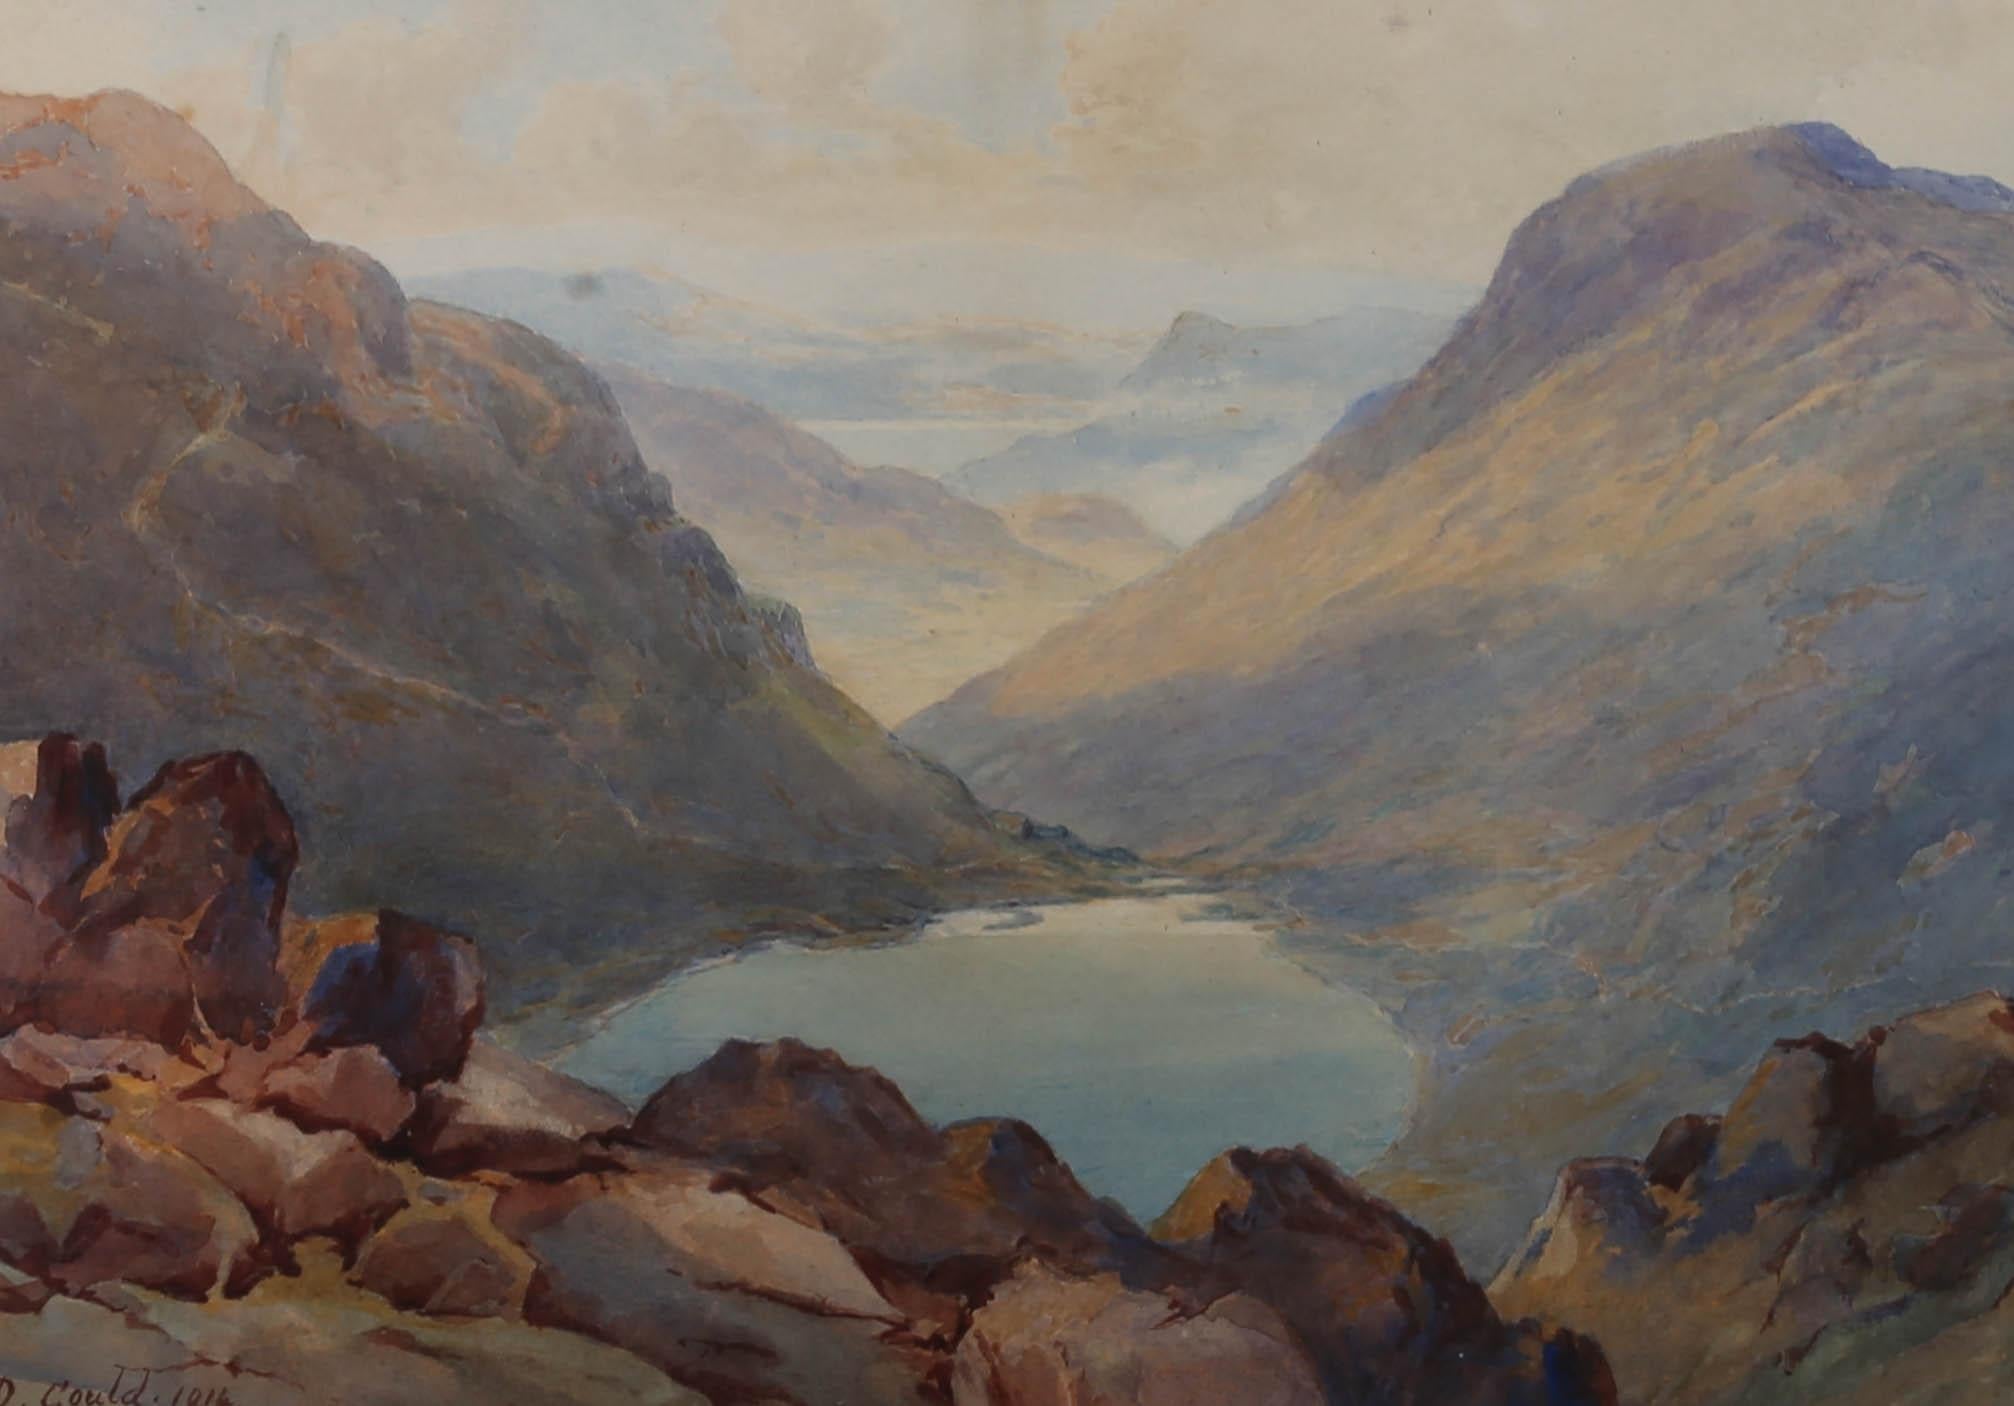 An atmospheric and striking early 20th century watercolour by landscape artist David Gould. This impressive view from Grisedale Pike, Cumbria depicts a secluded water hole enveloped by undulating mountains on either side. This scene is typical of